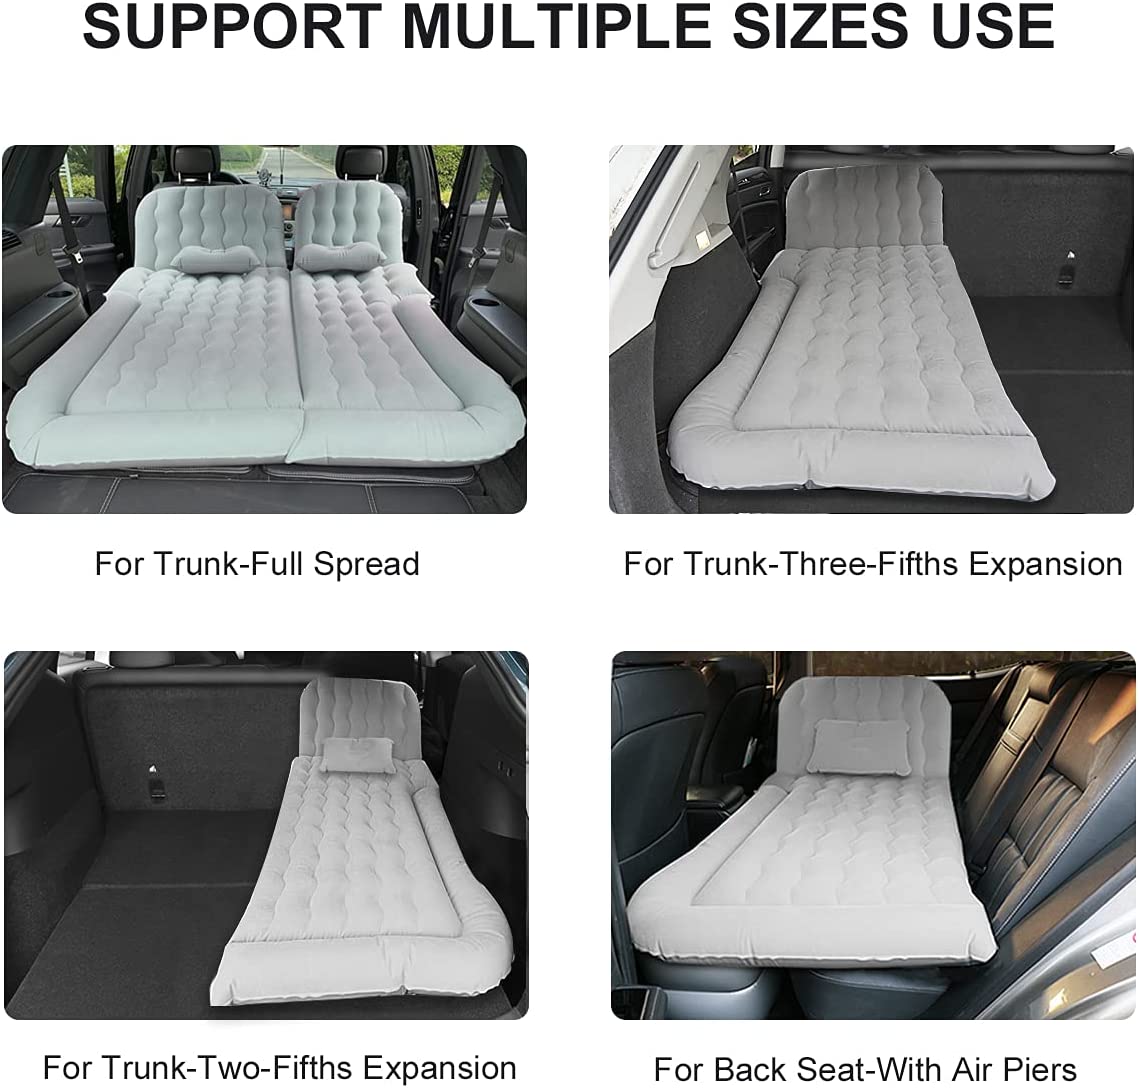 Car Camping SUV Air Mattress Inflatable Trunk Backseat Bed